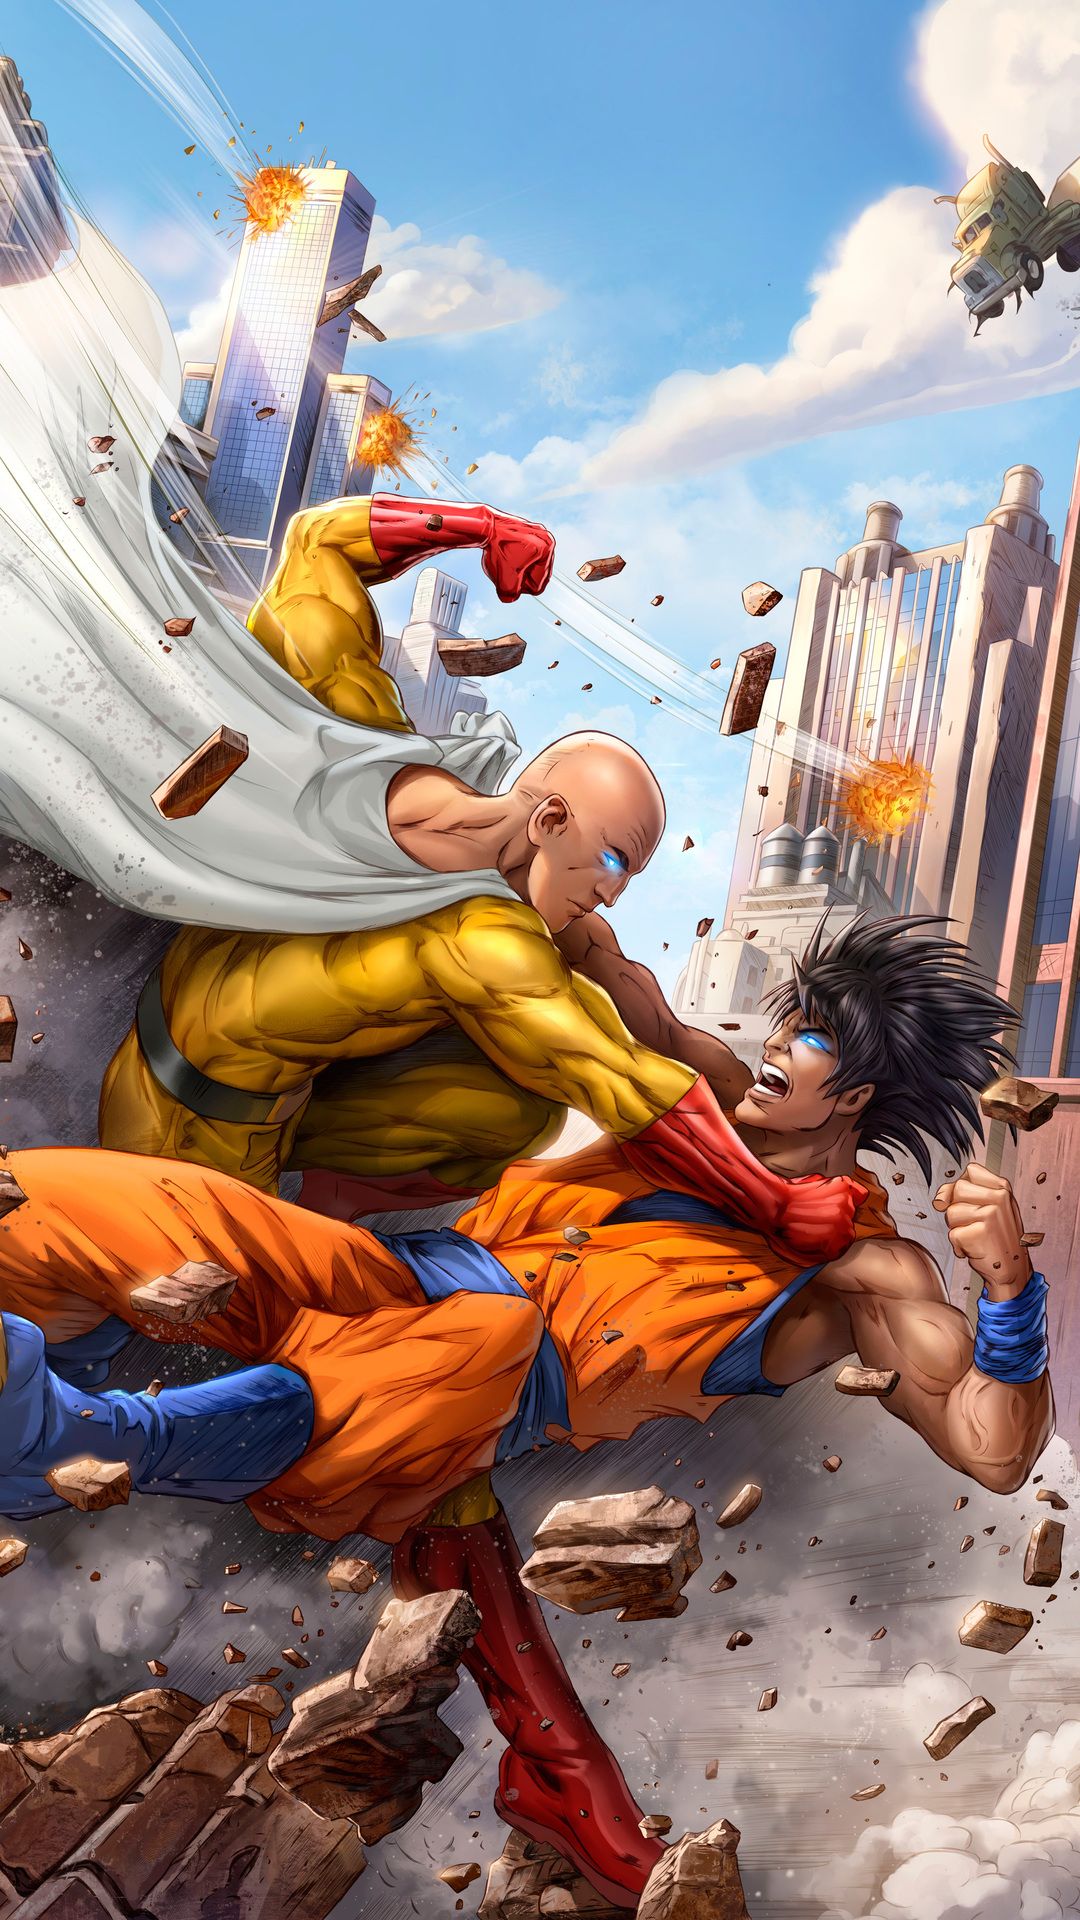 Download wallpaper 840x1160 saitama, one-punch man, anime boy, artwork,  iphone 4, iphone 4s, ipod touch, 840x1160 hd background, 6425